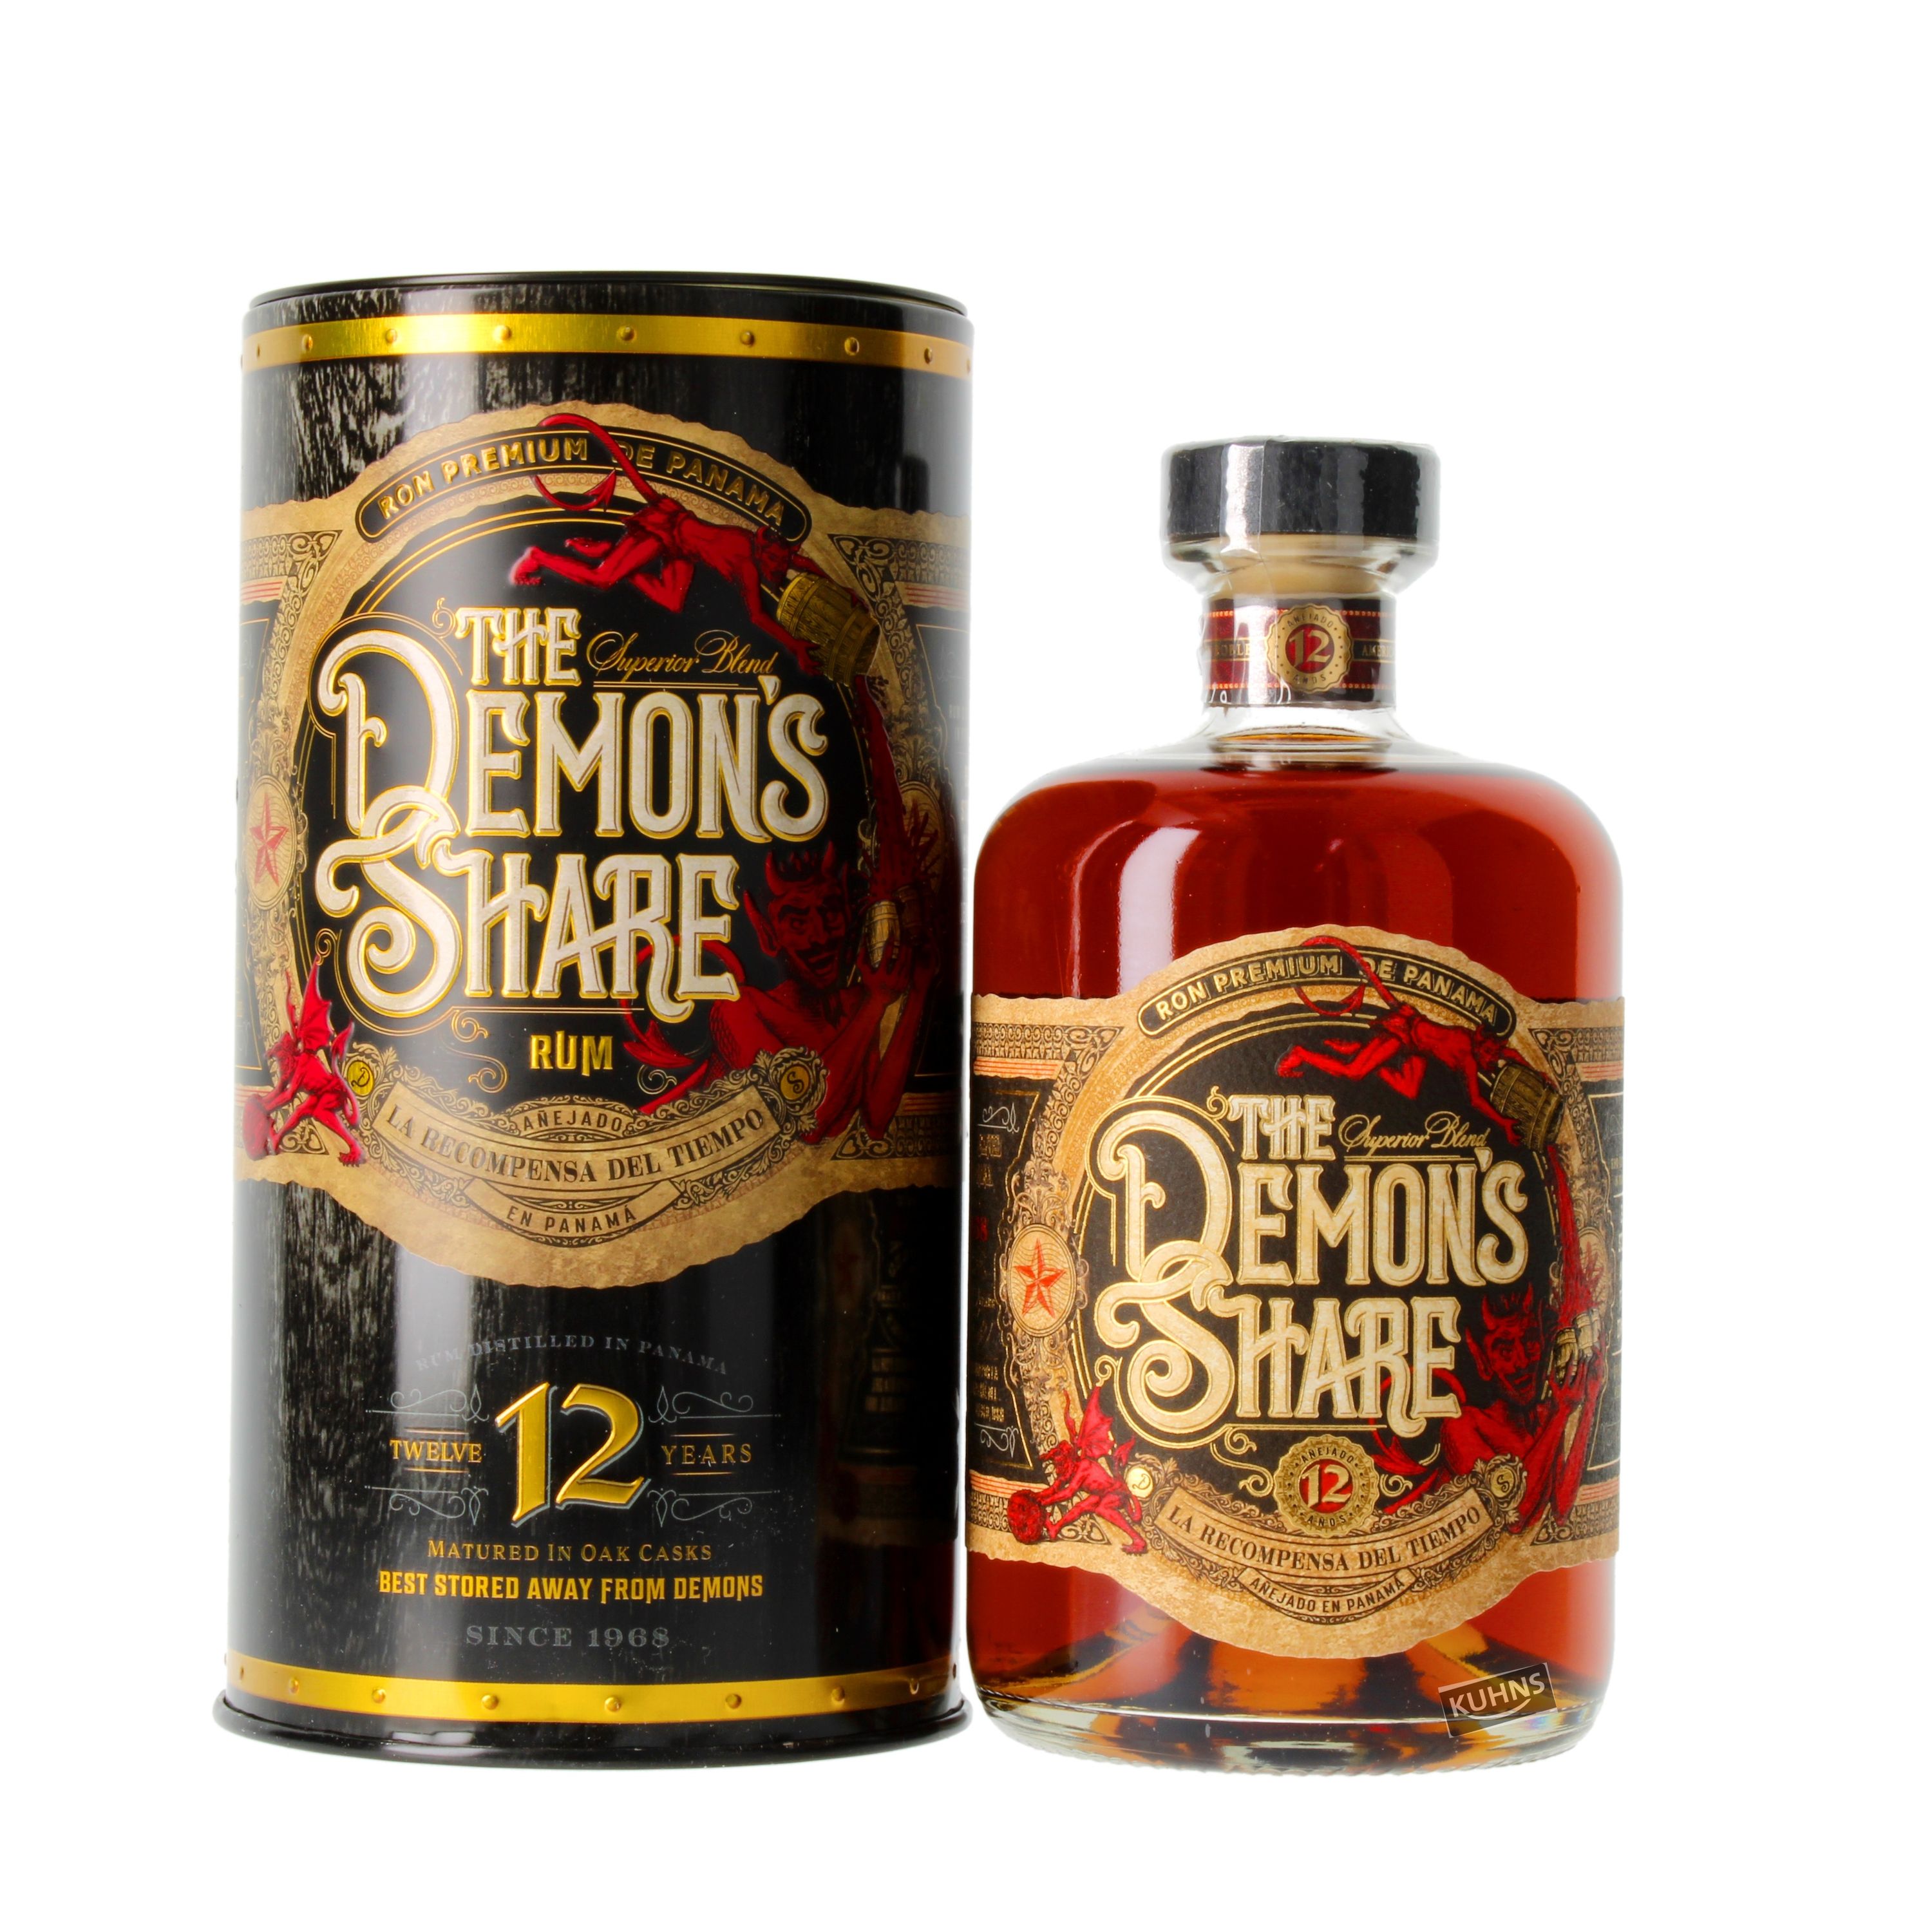 The Demon's Share 12 years 0.7l, alc. 41% by volume, Rum Panama